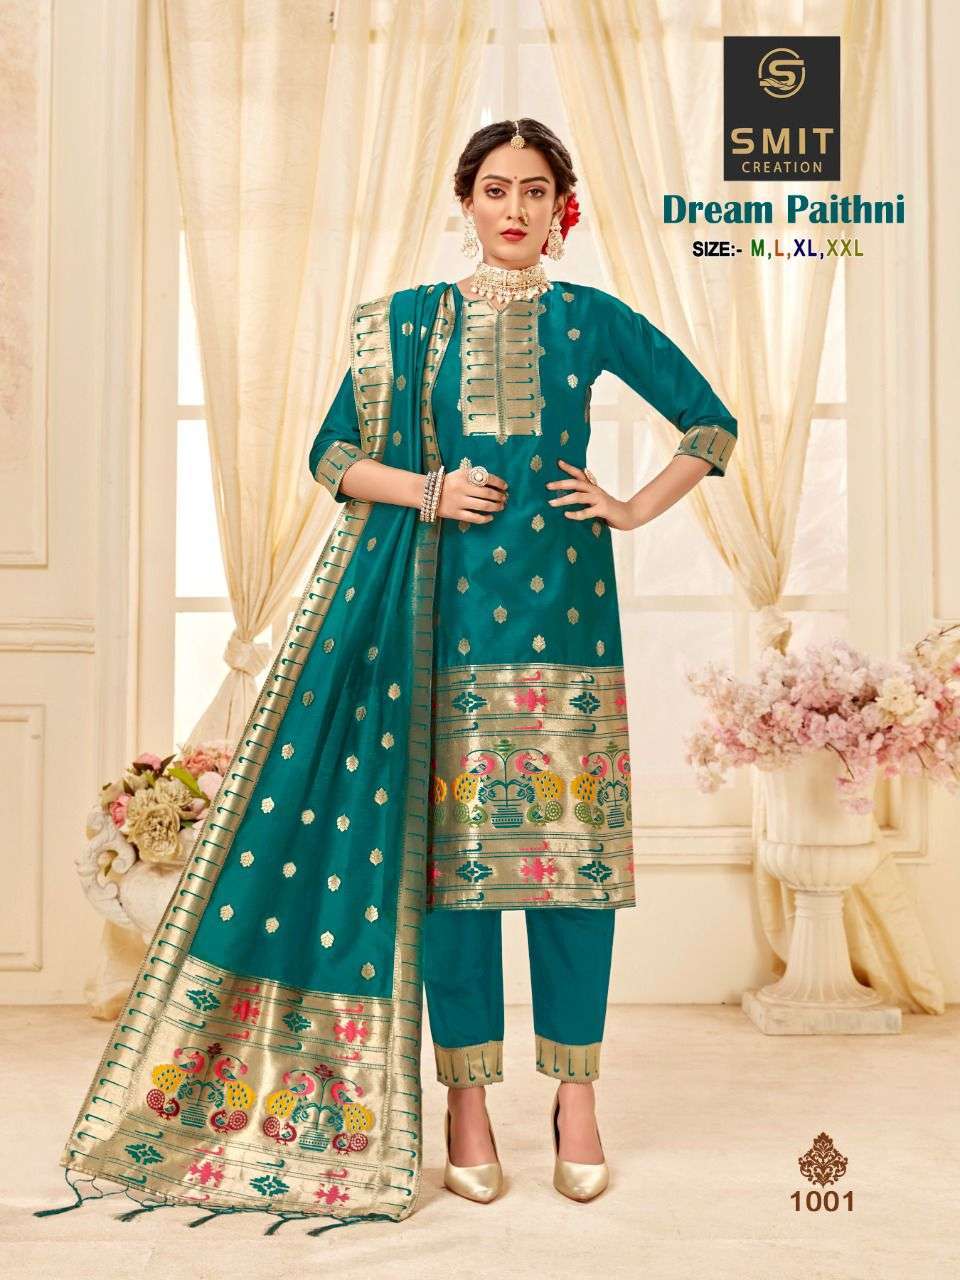 SMIT CREATION DREAM PAITHNI SILK READYMADE SUITS AT WHOLESAL...